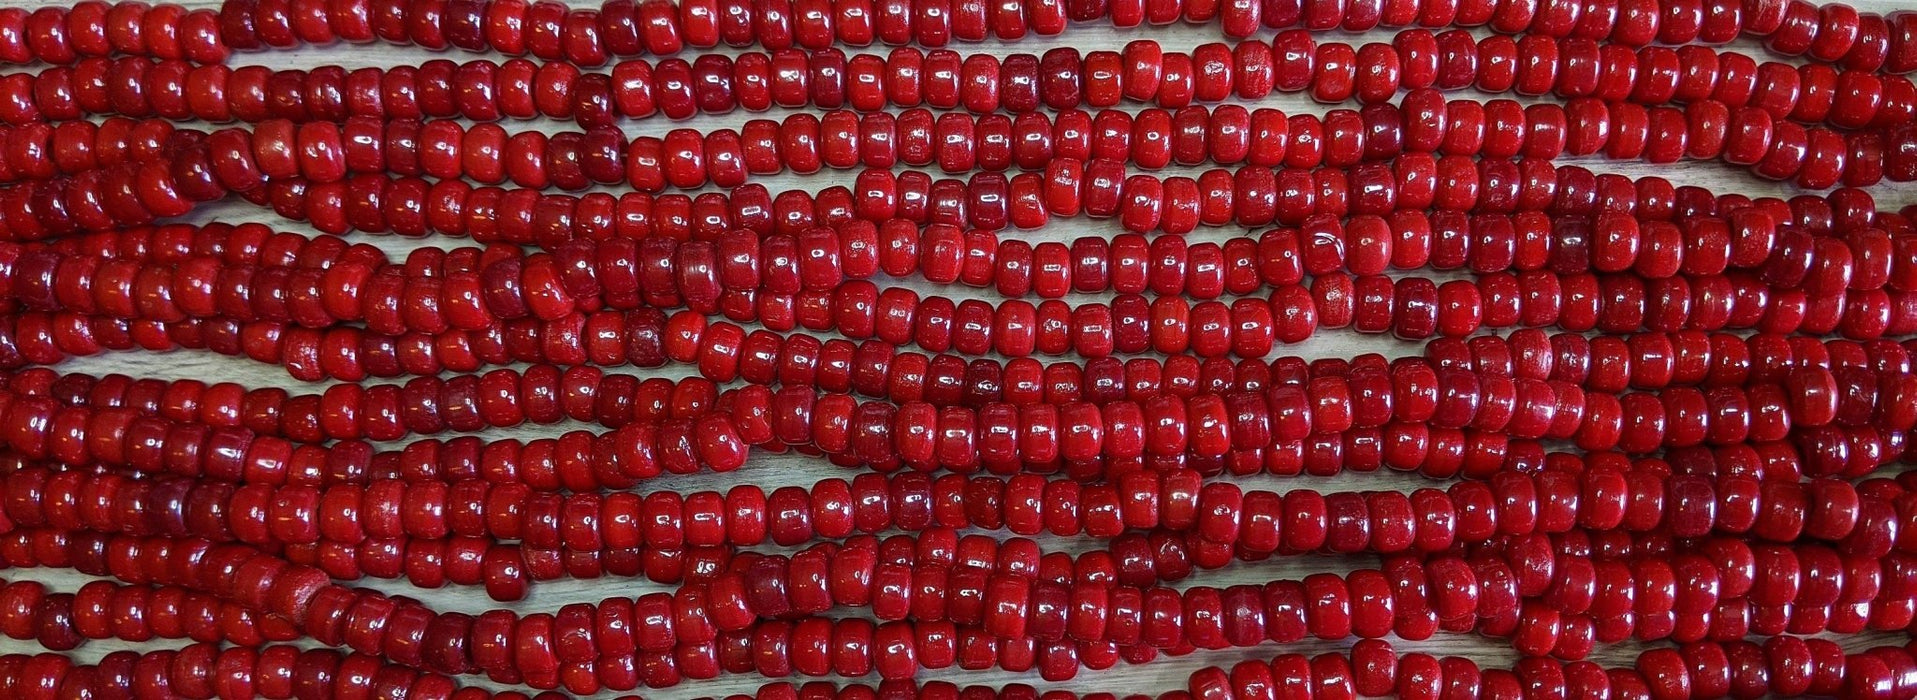 Opaque Red Luster - Size 9x6mm (3mm hole) Recycled Glass Crow Beads - 24 Inch Strand (ICB17) - Beads and Babble